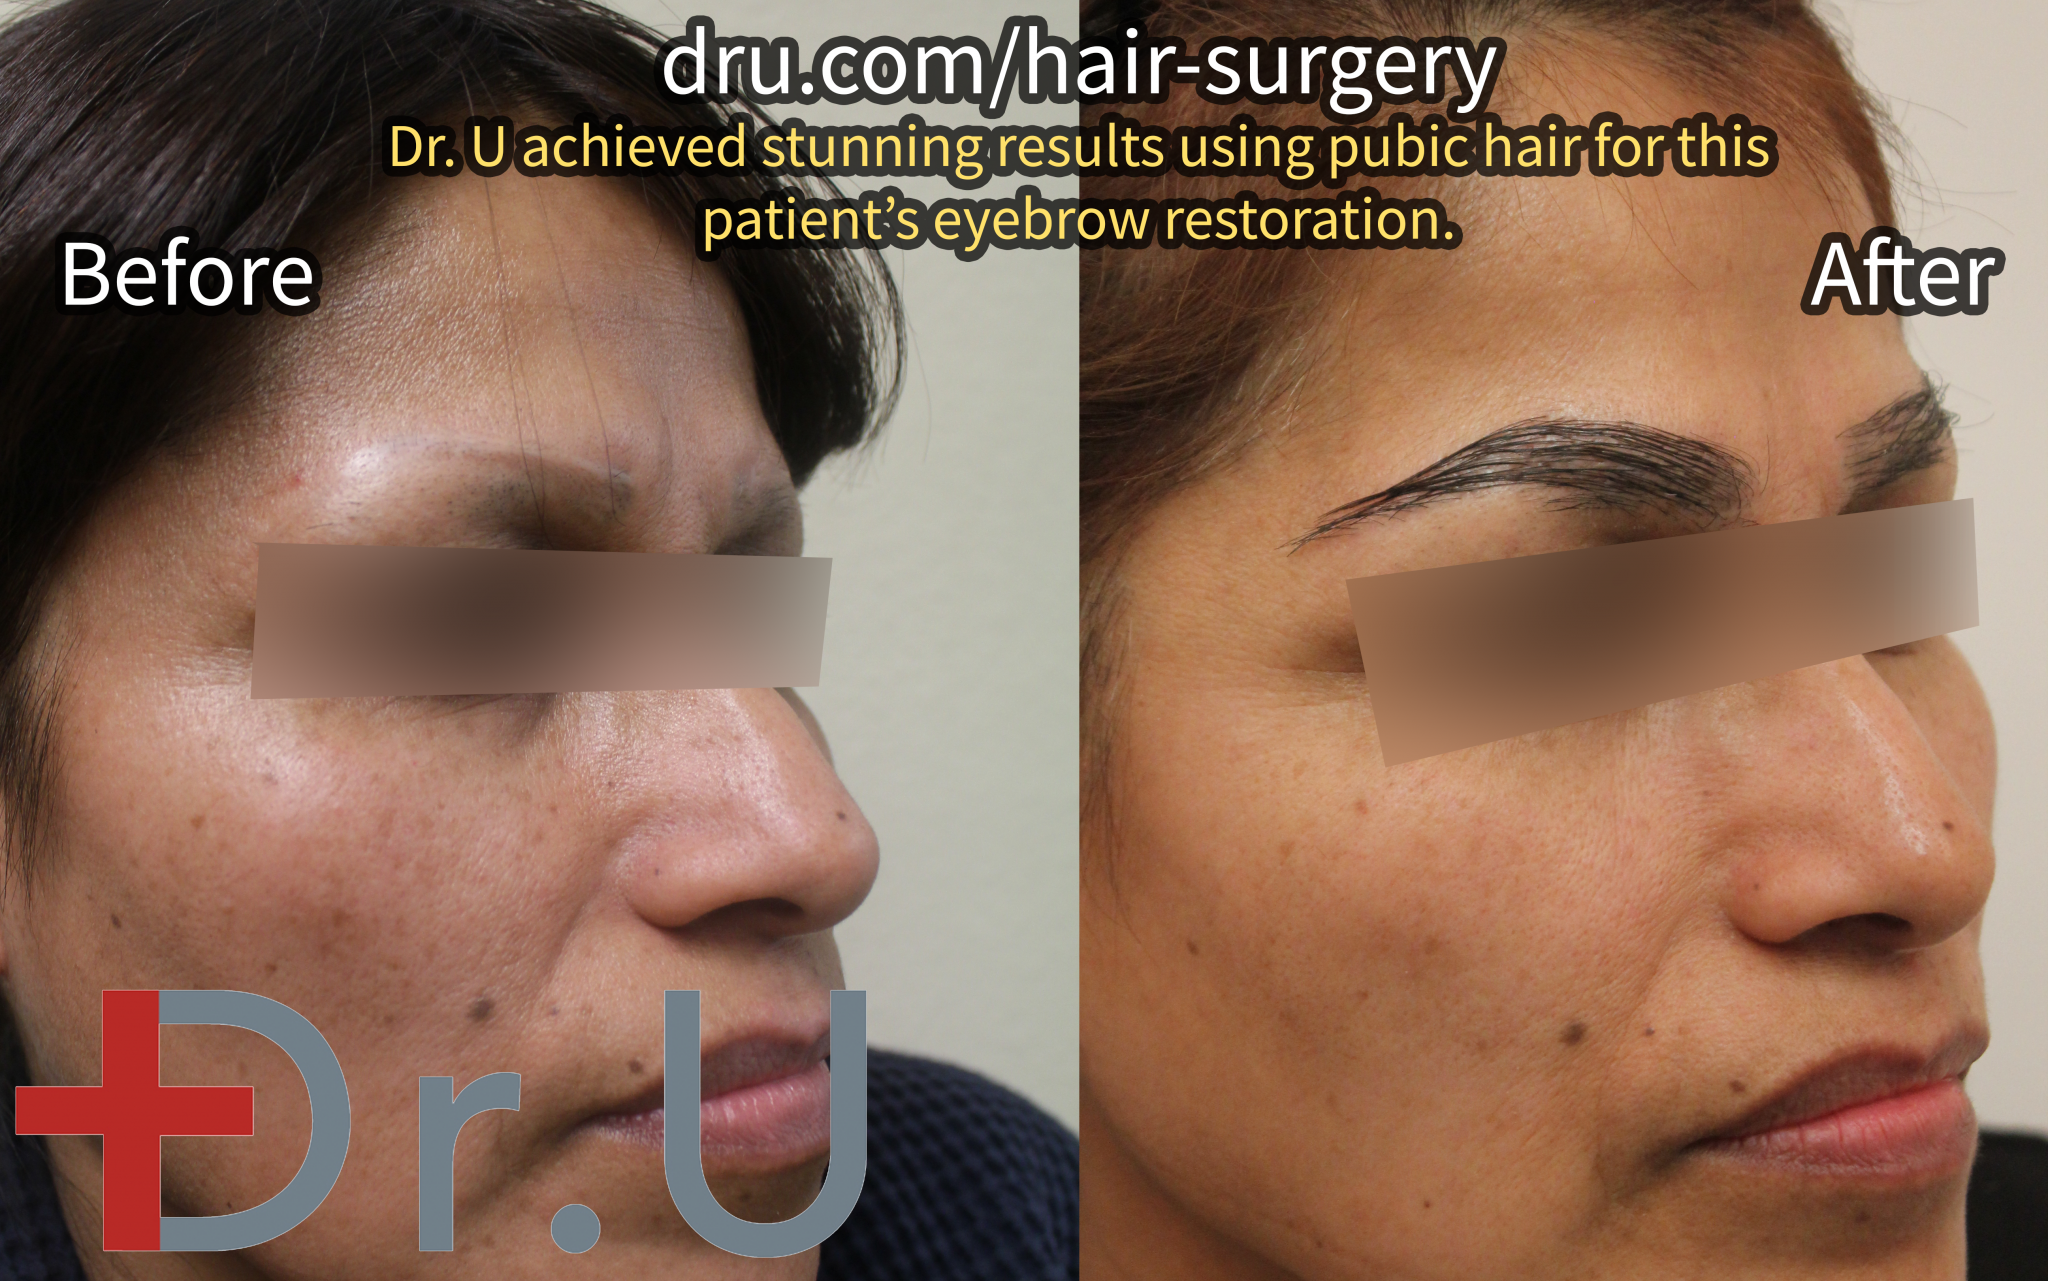 Before and After Posts - Body Hair Restoration Cases